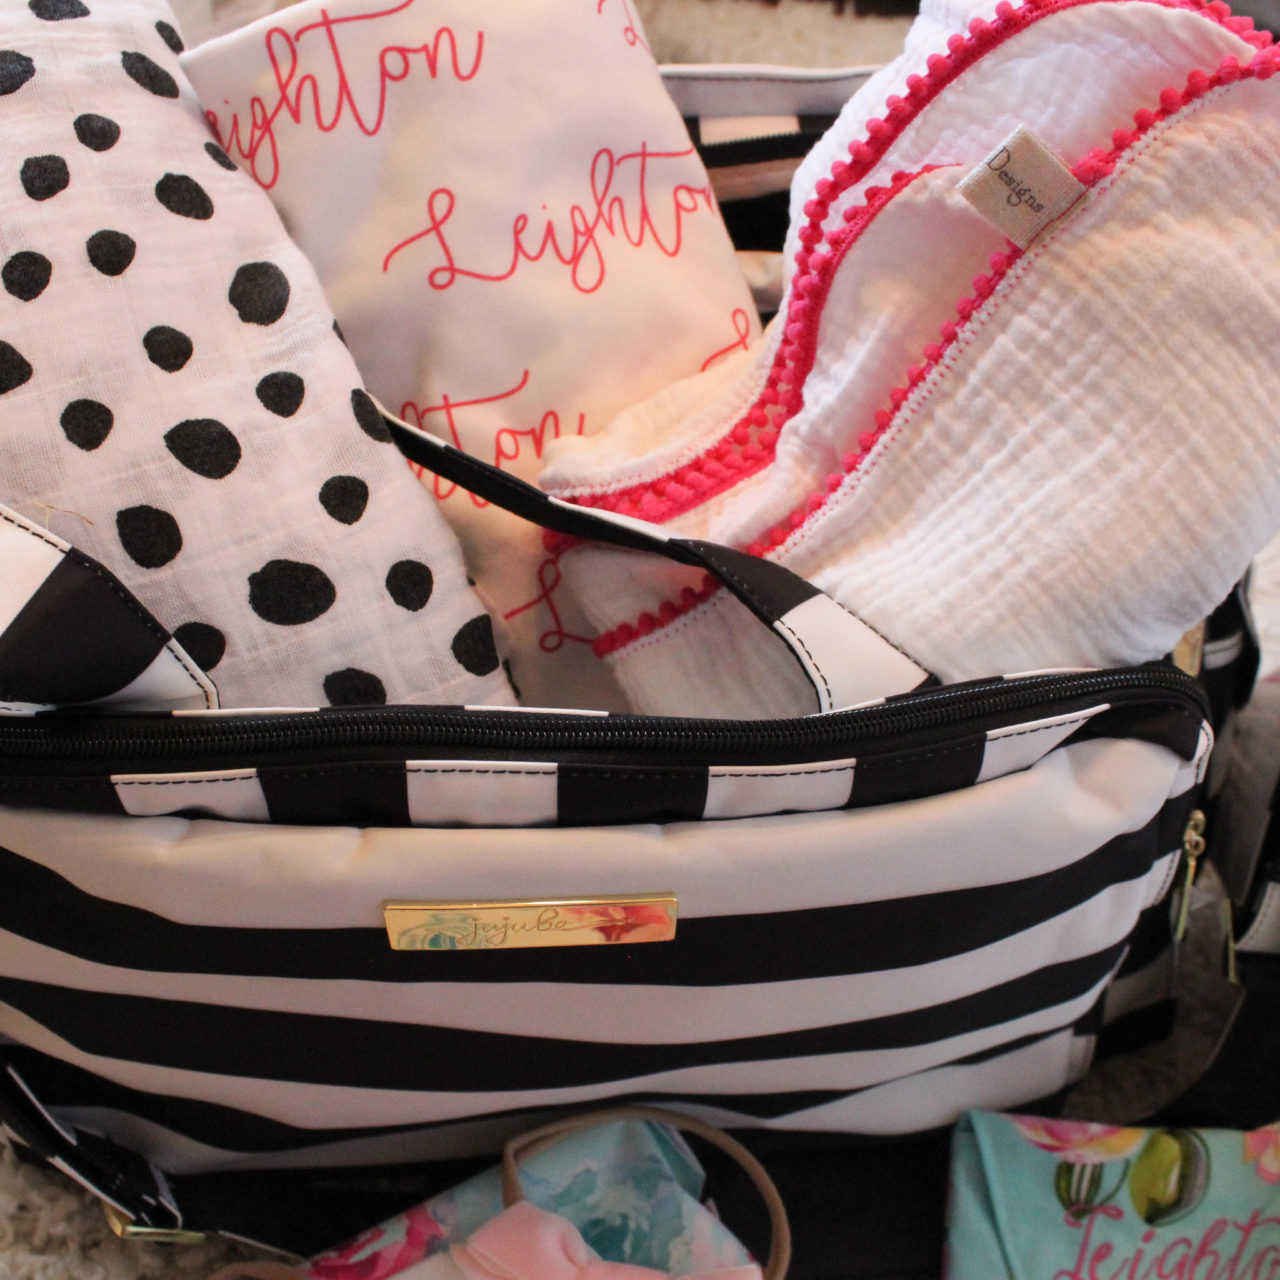 Hospital bag essentials: for the baby!